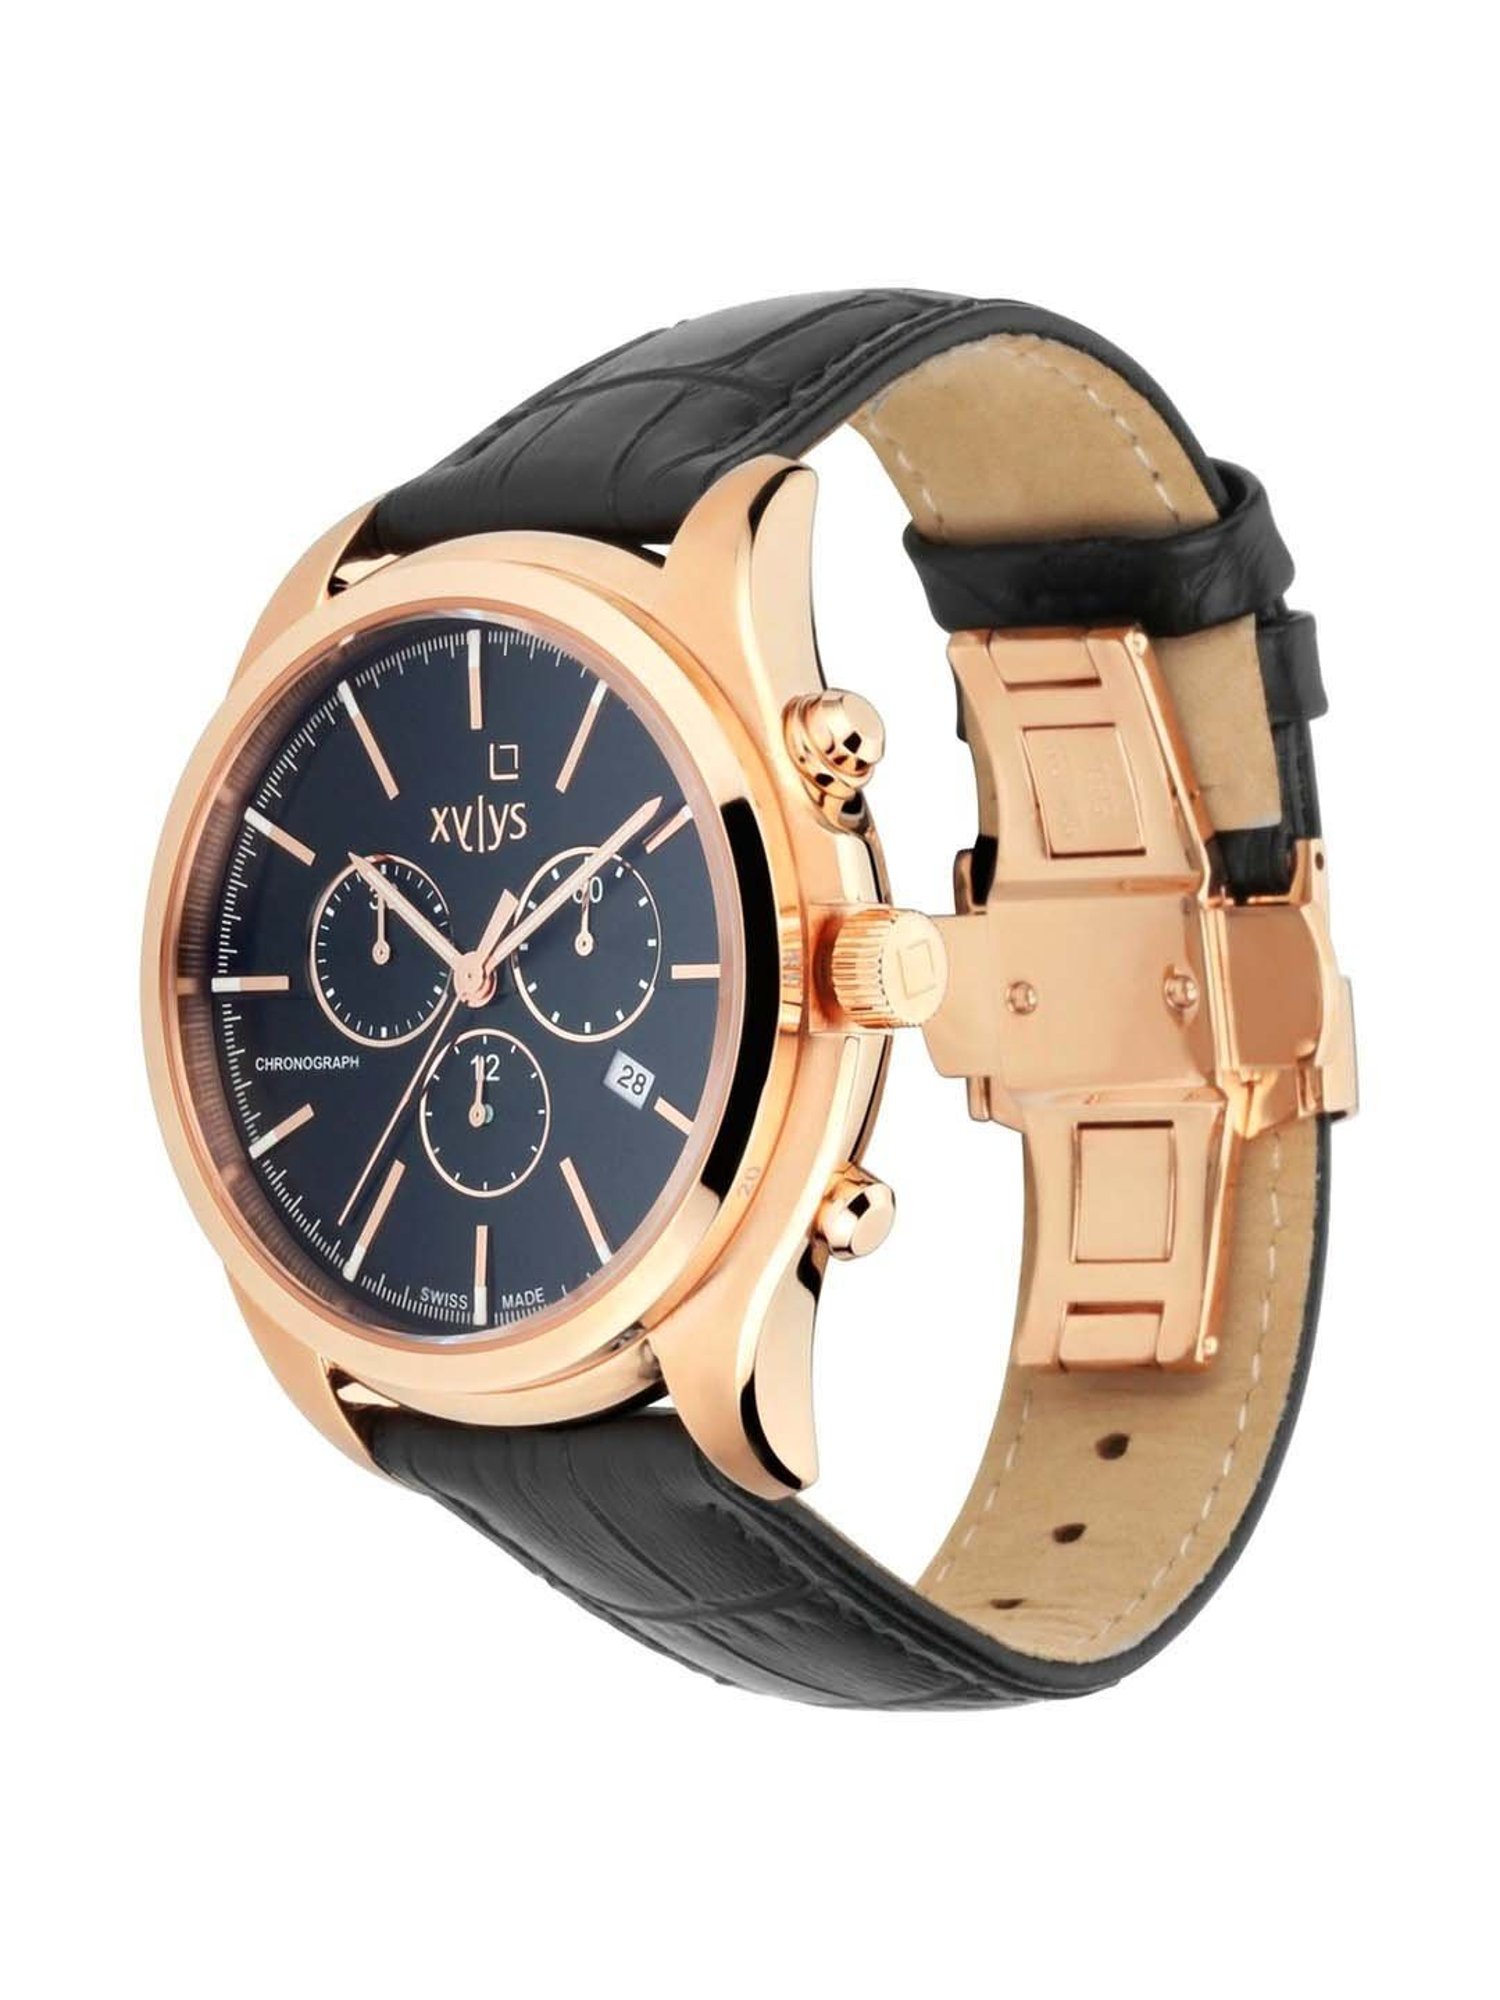 XYLYS NR40020KL01E-DG995-XYLYS Analog Watch - For Men - Buy XYLYS  NR40020KL01E-DG995-XYLYS Analog Watch - For Men NR40020KL01E Online at Best  Prices in India | Flipkart.com